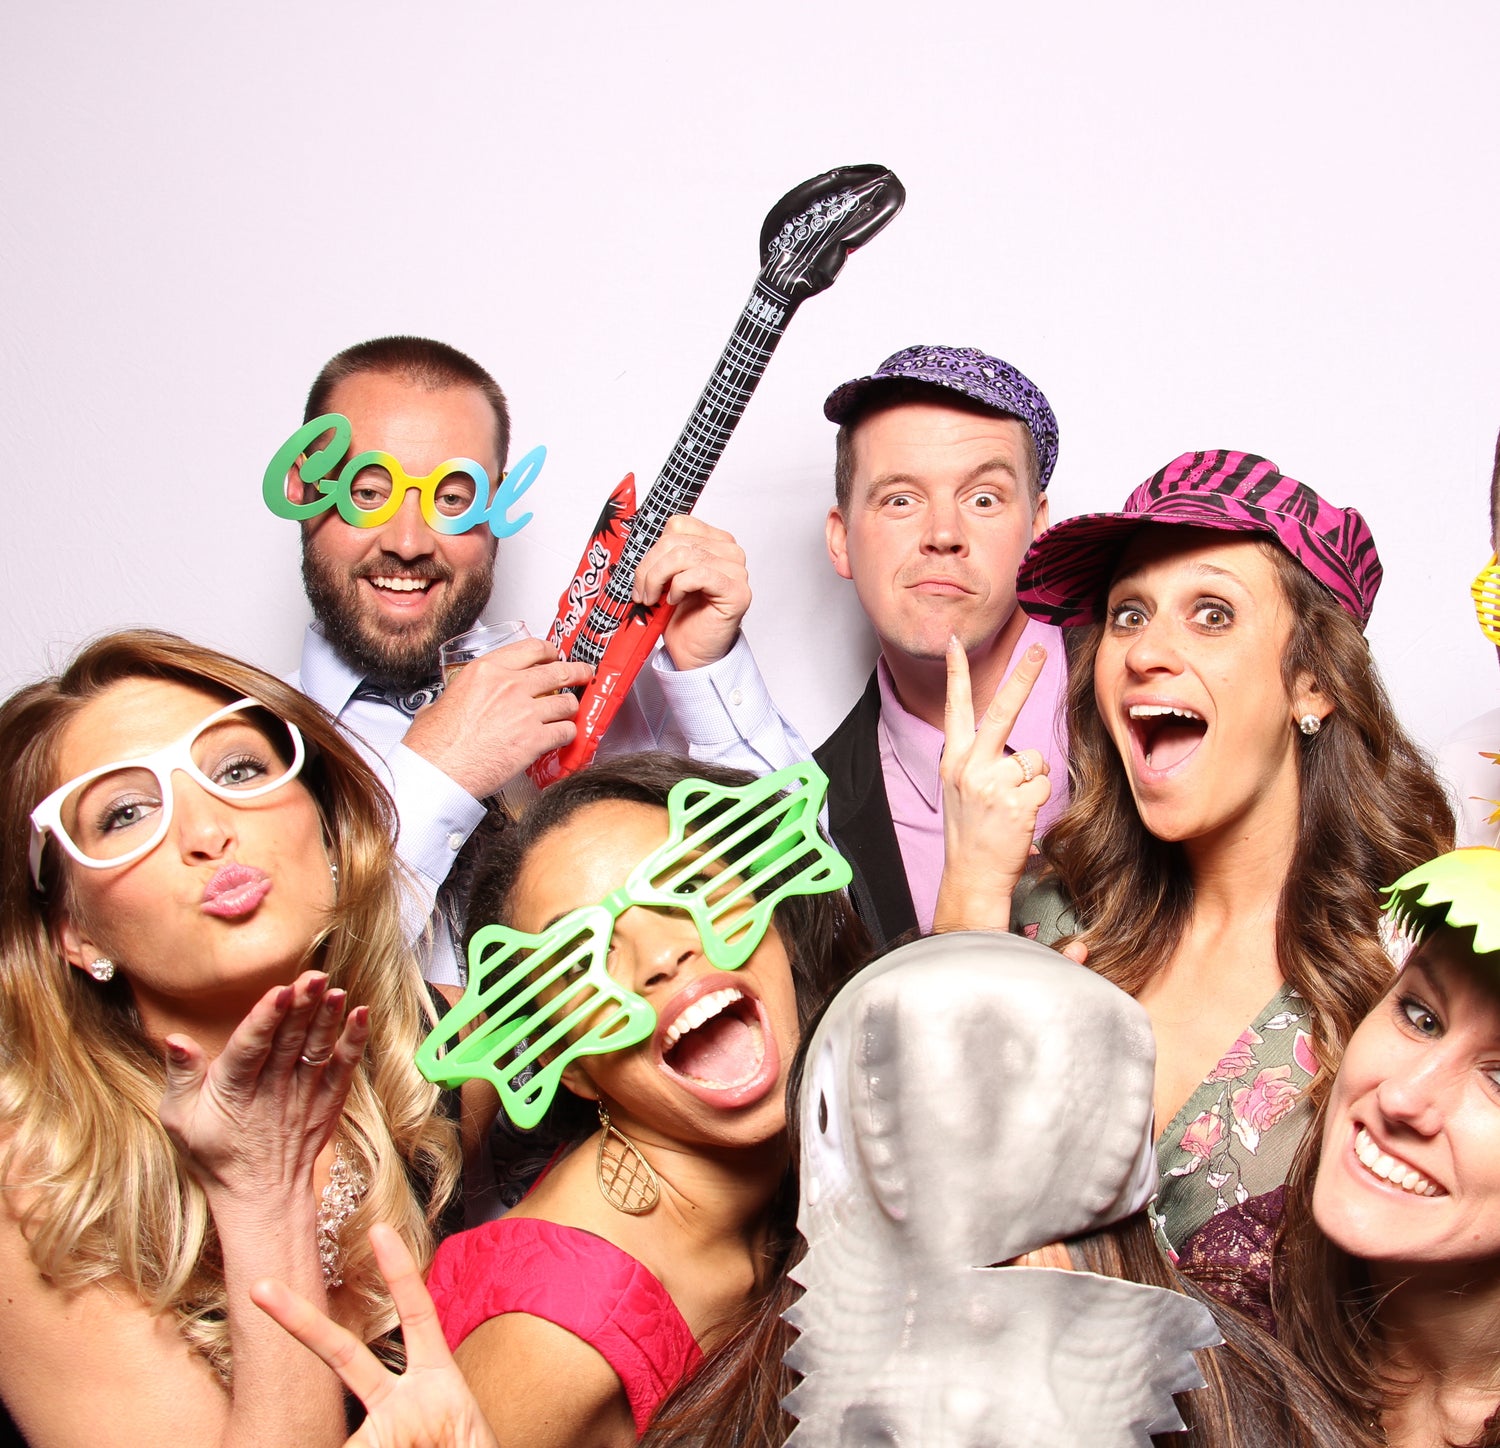 Wedding photo booth fun with party props